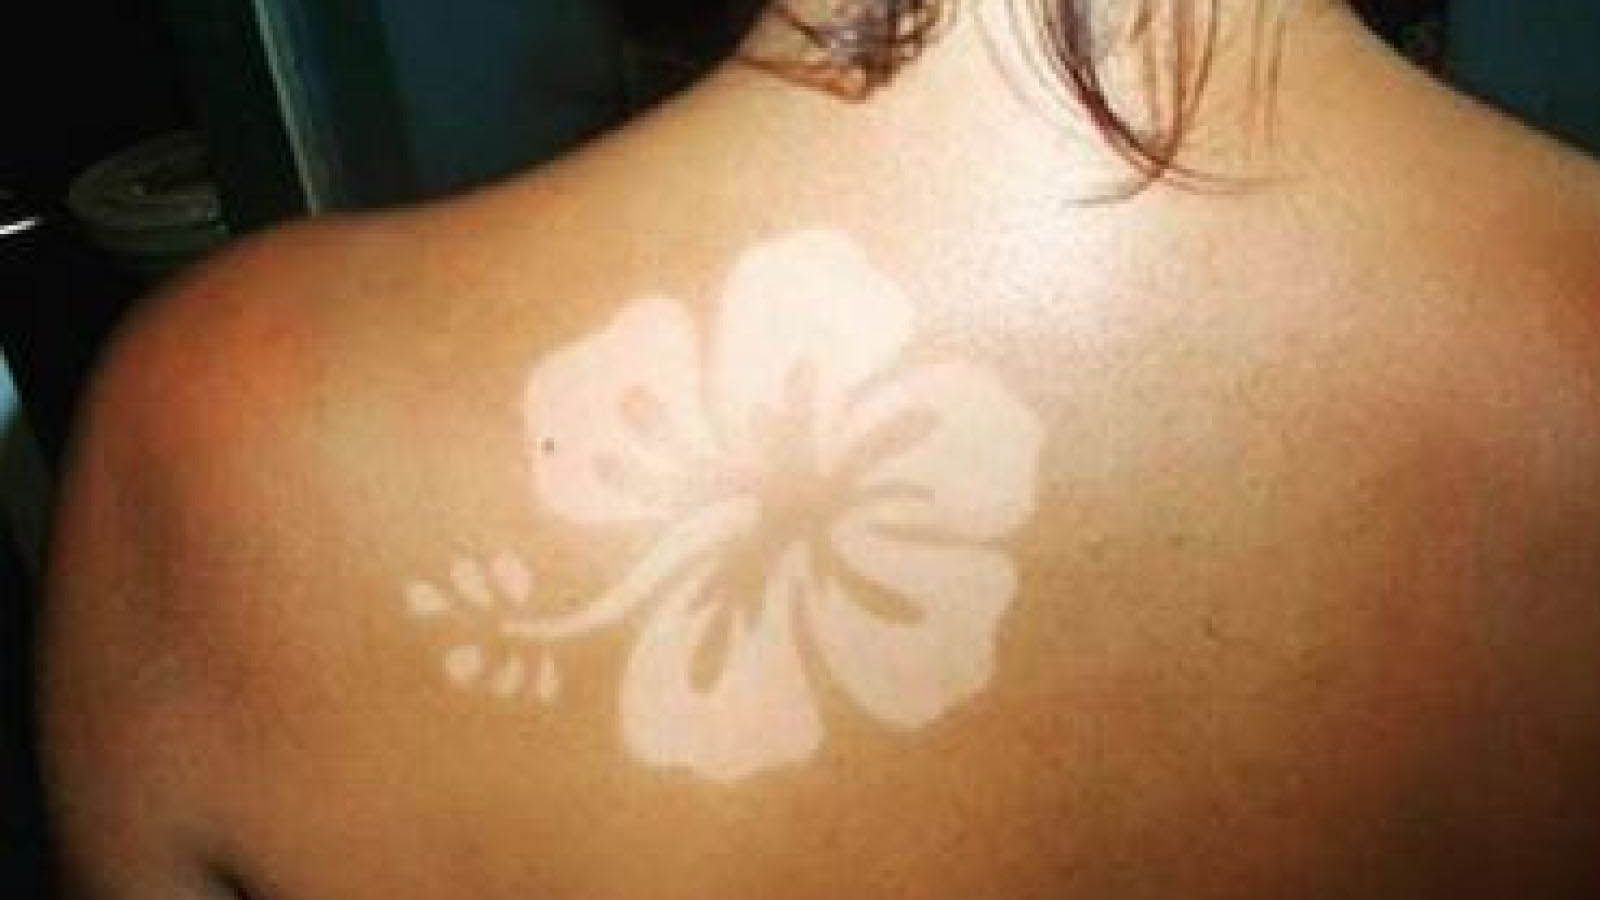 What happens to a tattoo when you get sunburned or get a lot of exposure to  sunlight in a hot climate  Quora